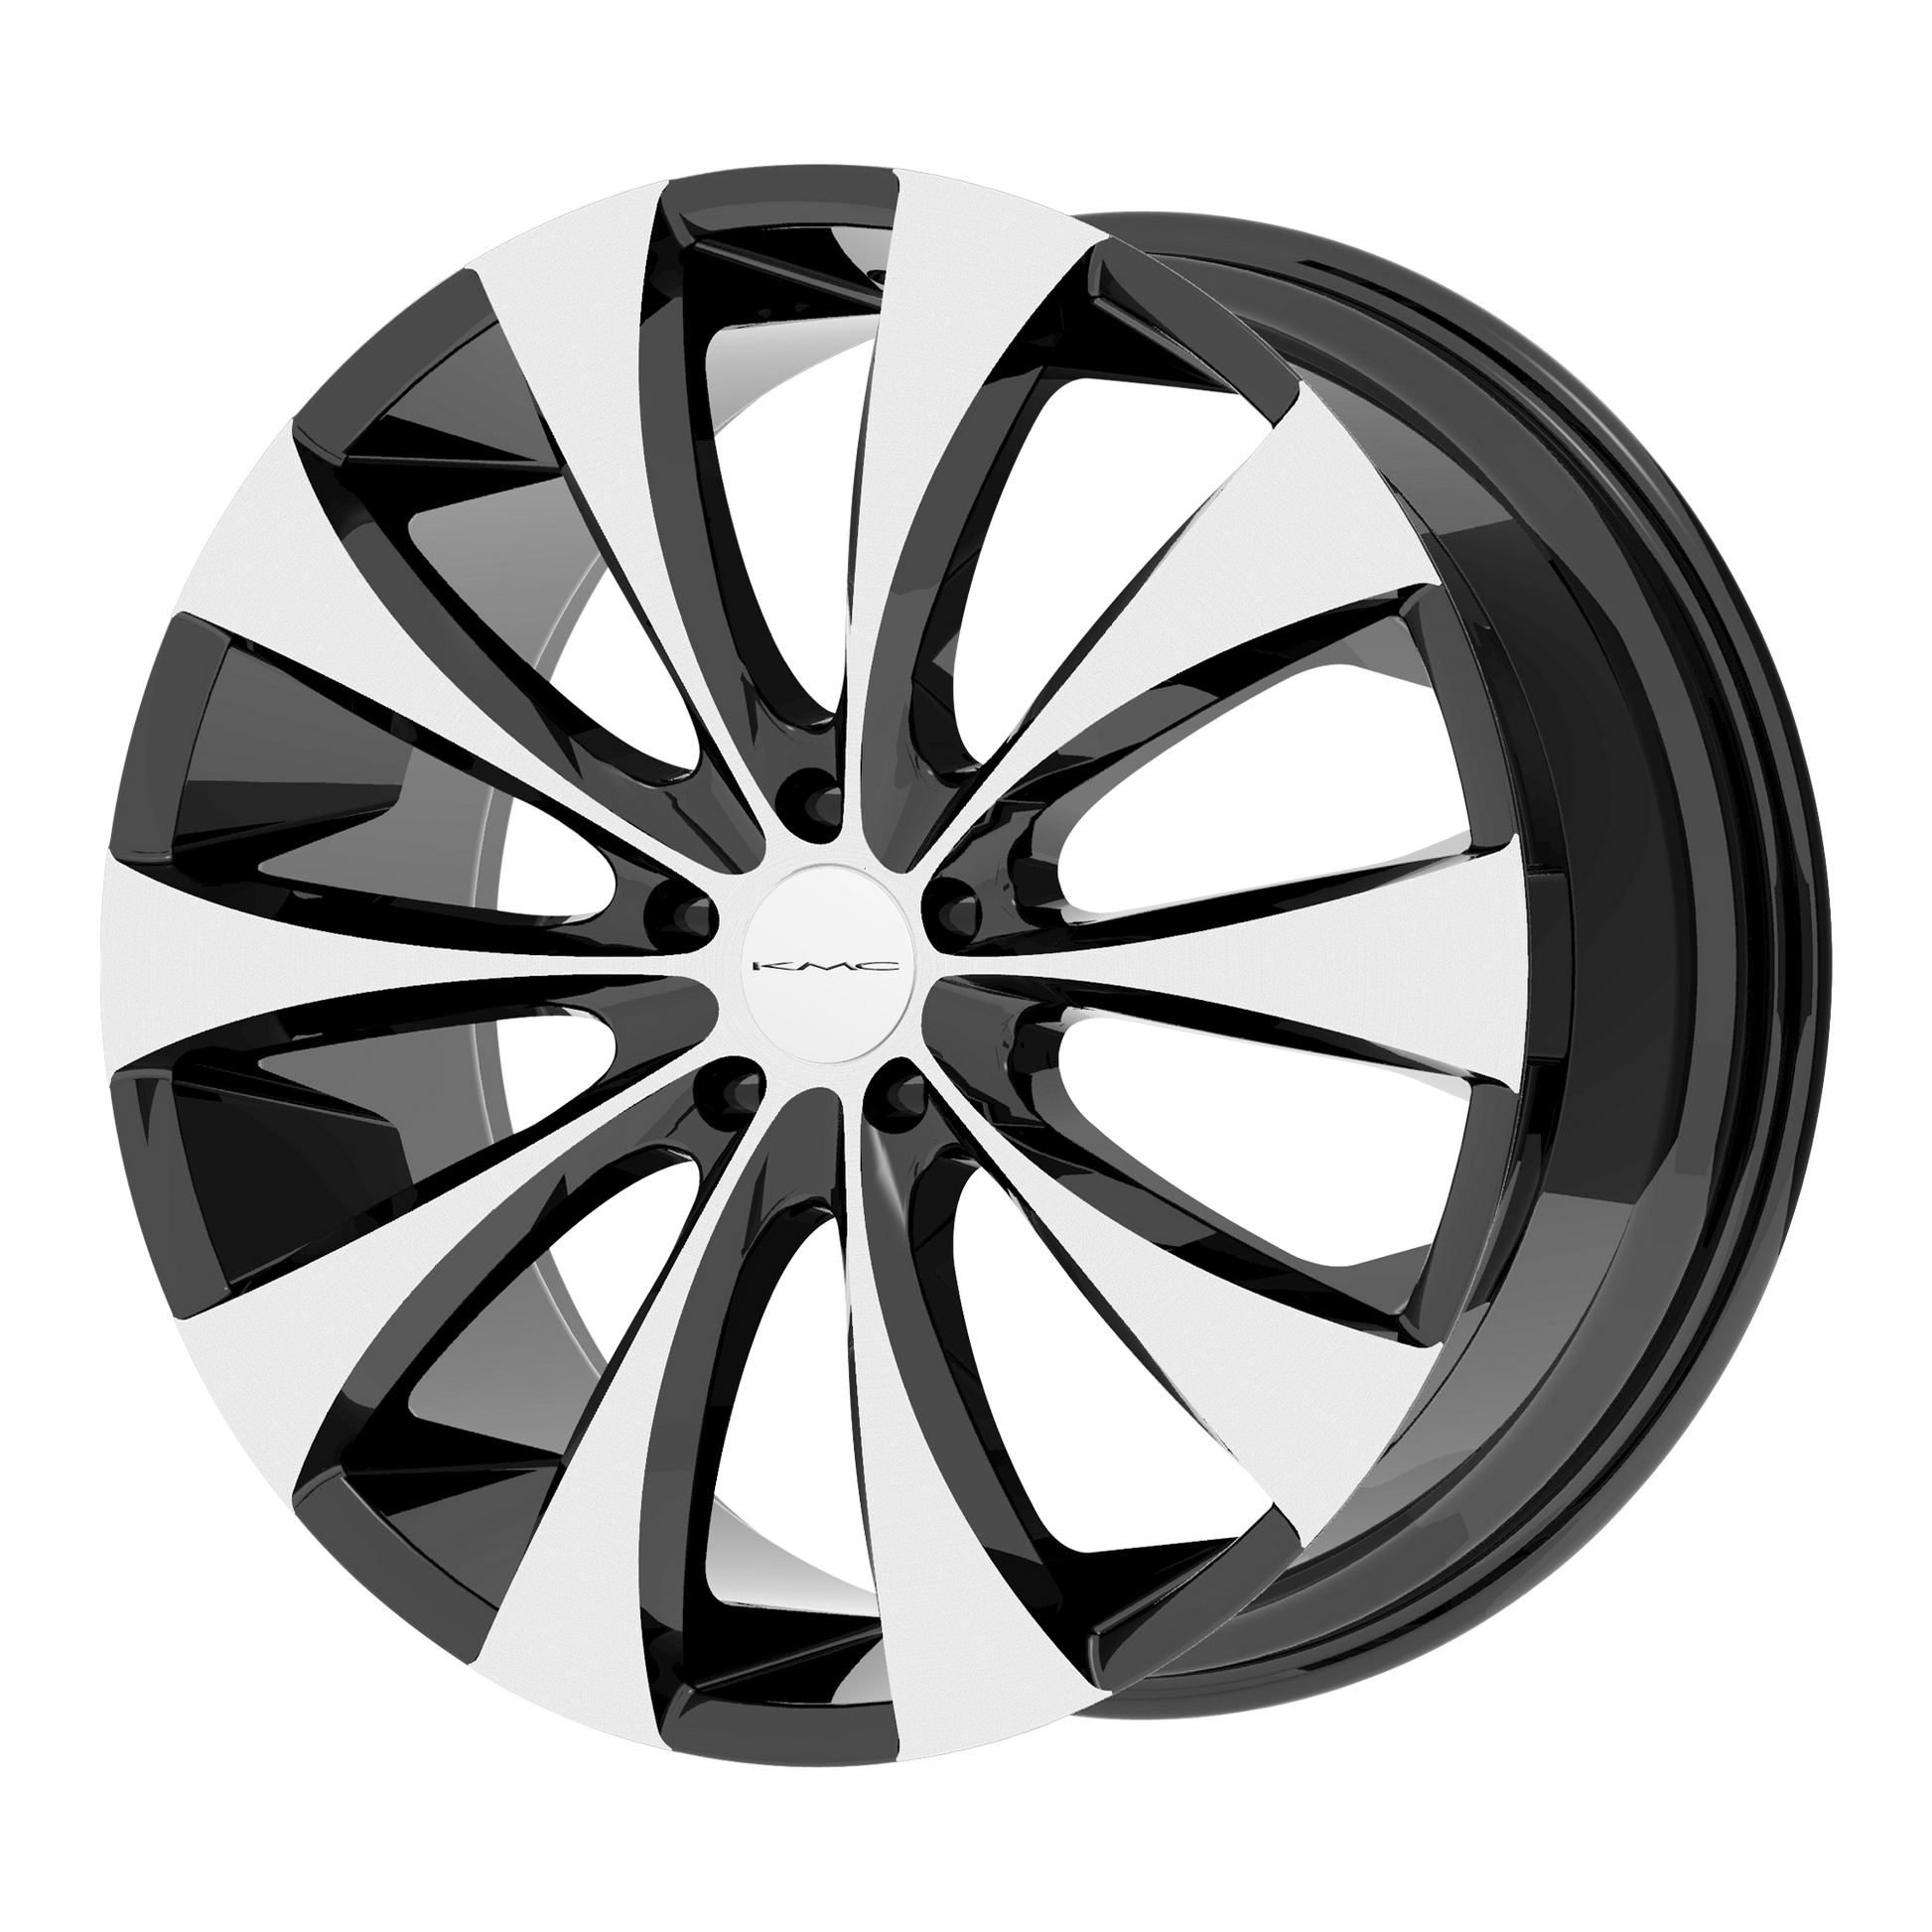 Kmc Km679 Fader 20x9.5 20x9.5 38 Offset In Gloss Black W/ Machined Face